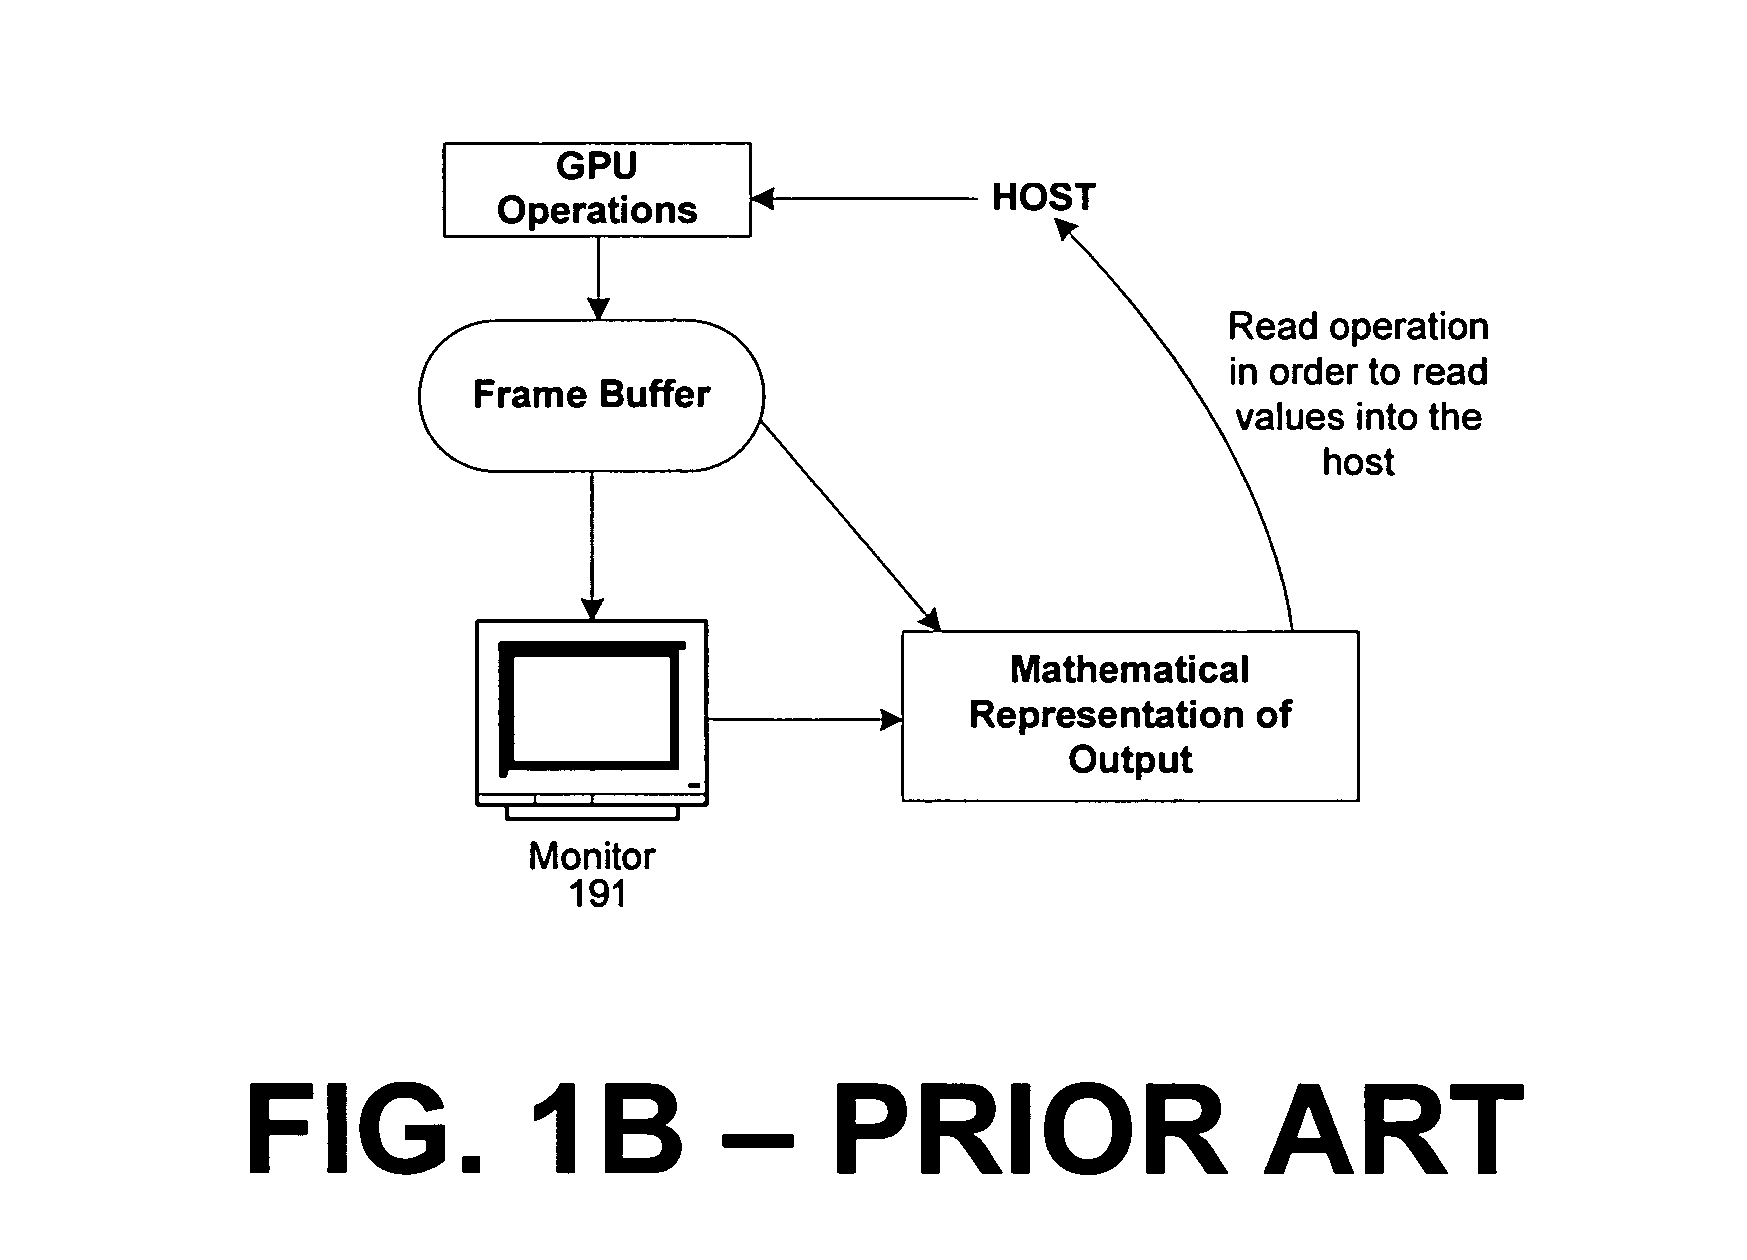 Systems and methods for providing an enhanced graphics pipeline